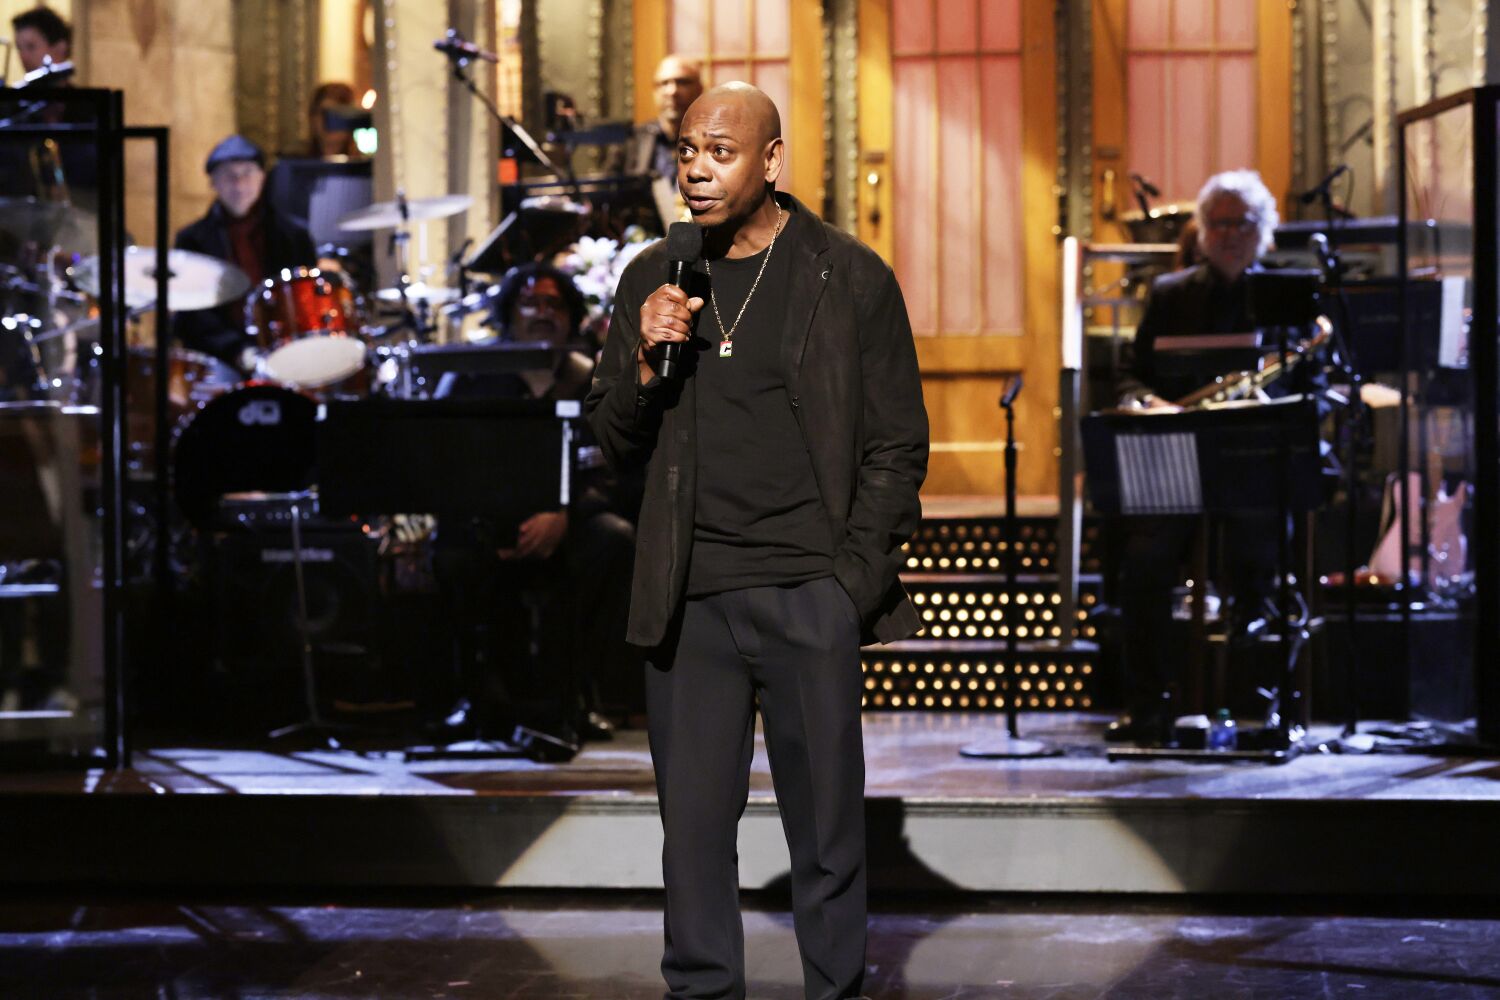 Man who attacked Dave Chappelle at the Hollywood Bowl sentenced to 270 days in jail